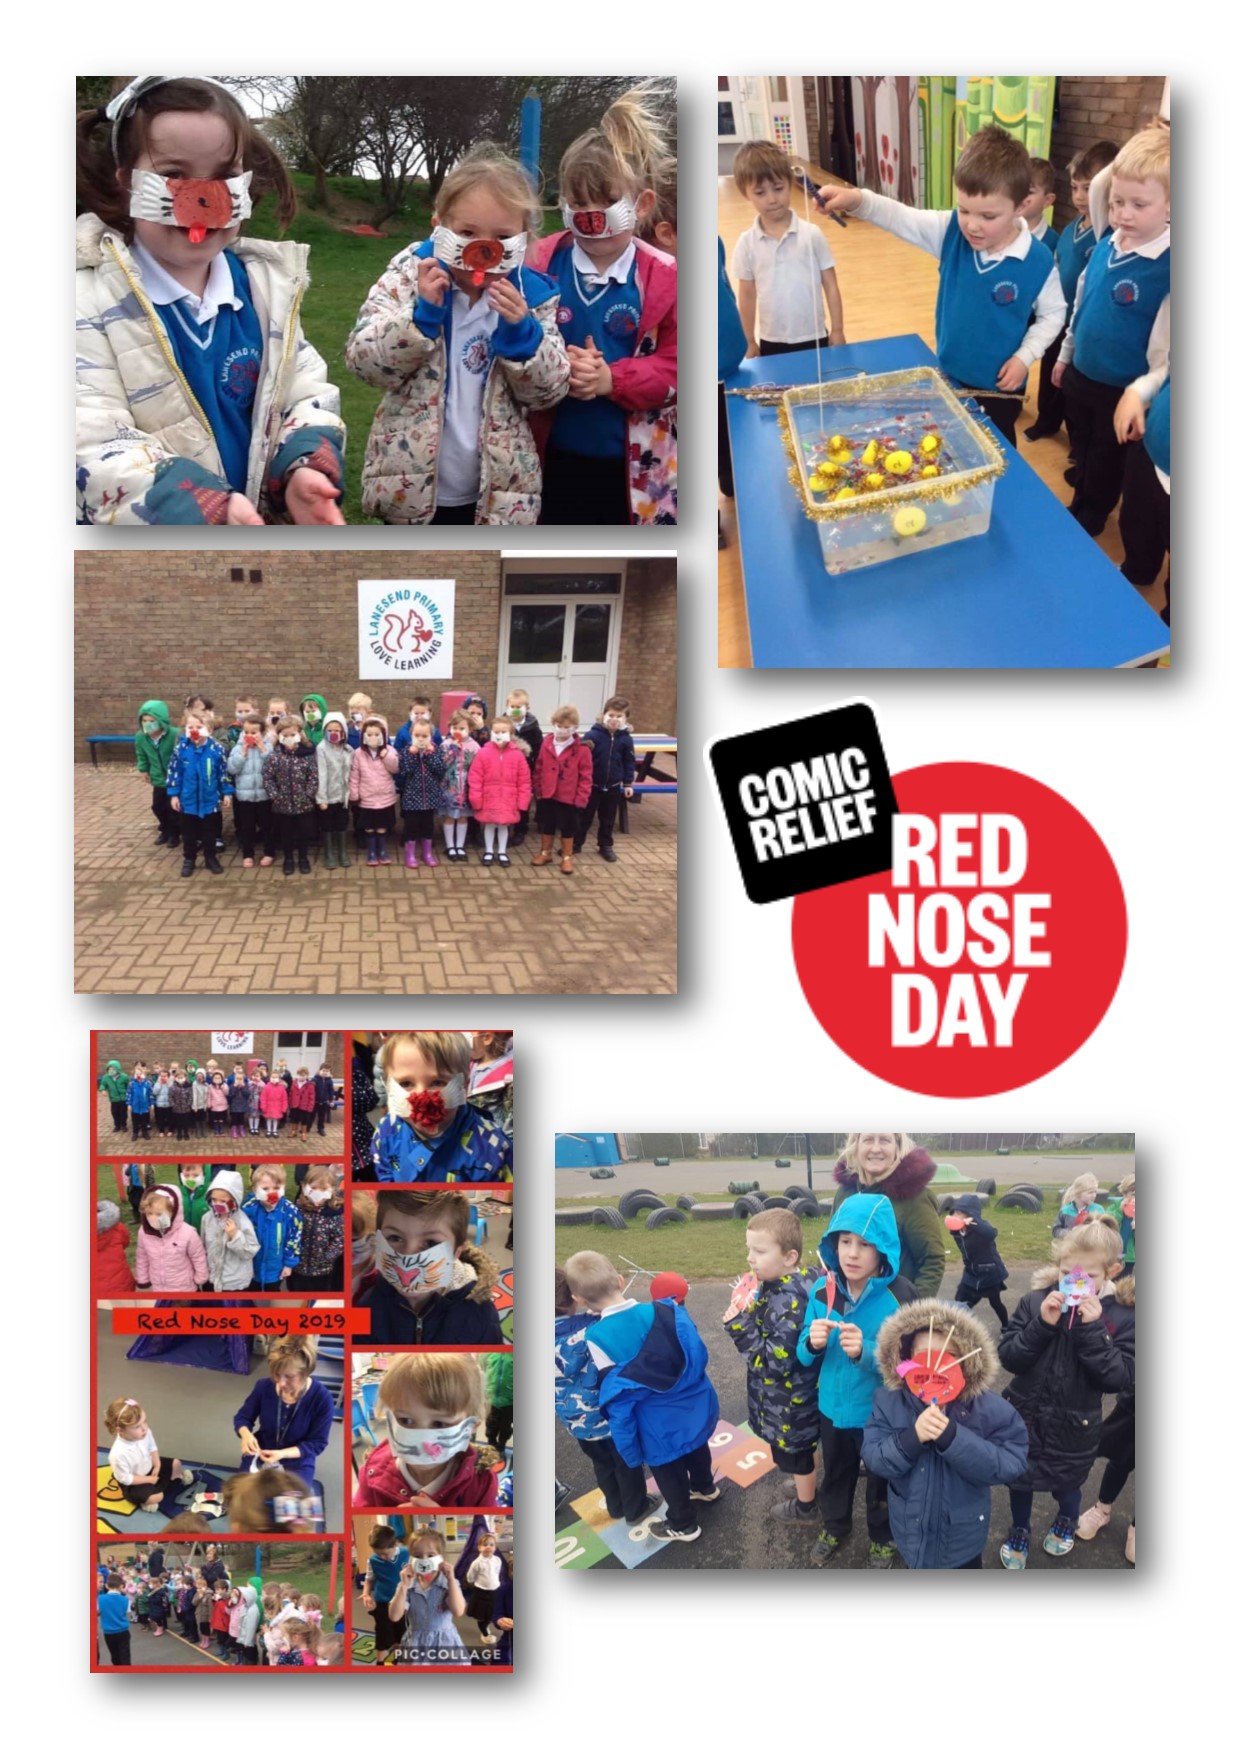 More fun from Red Nose Day!